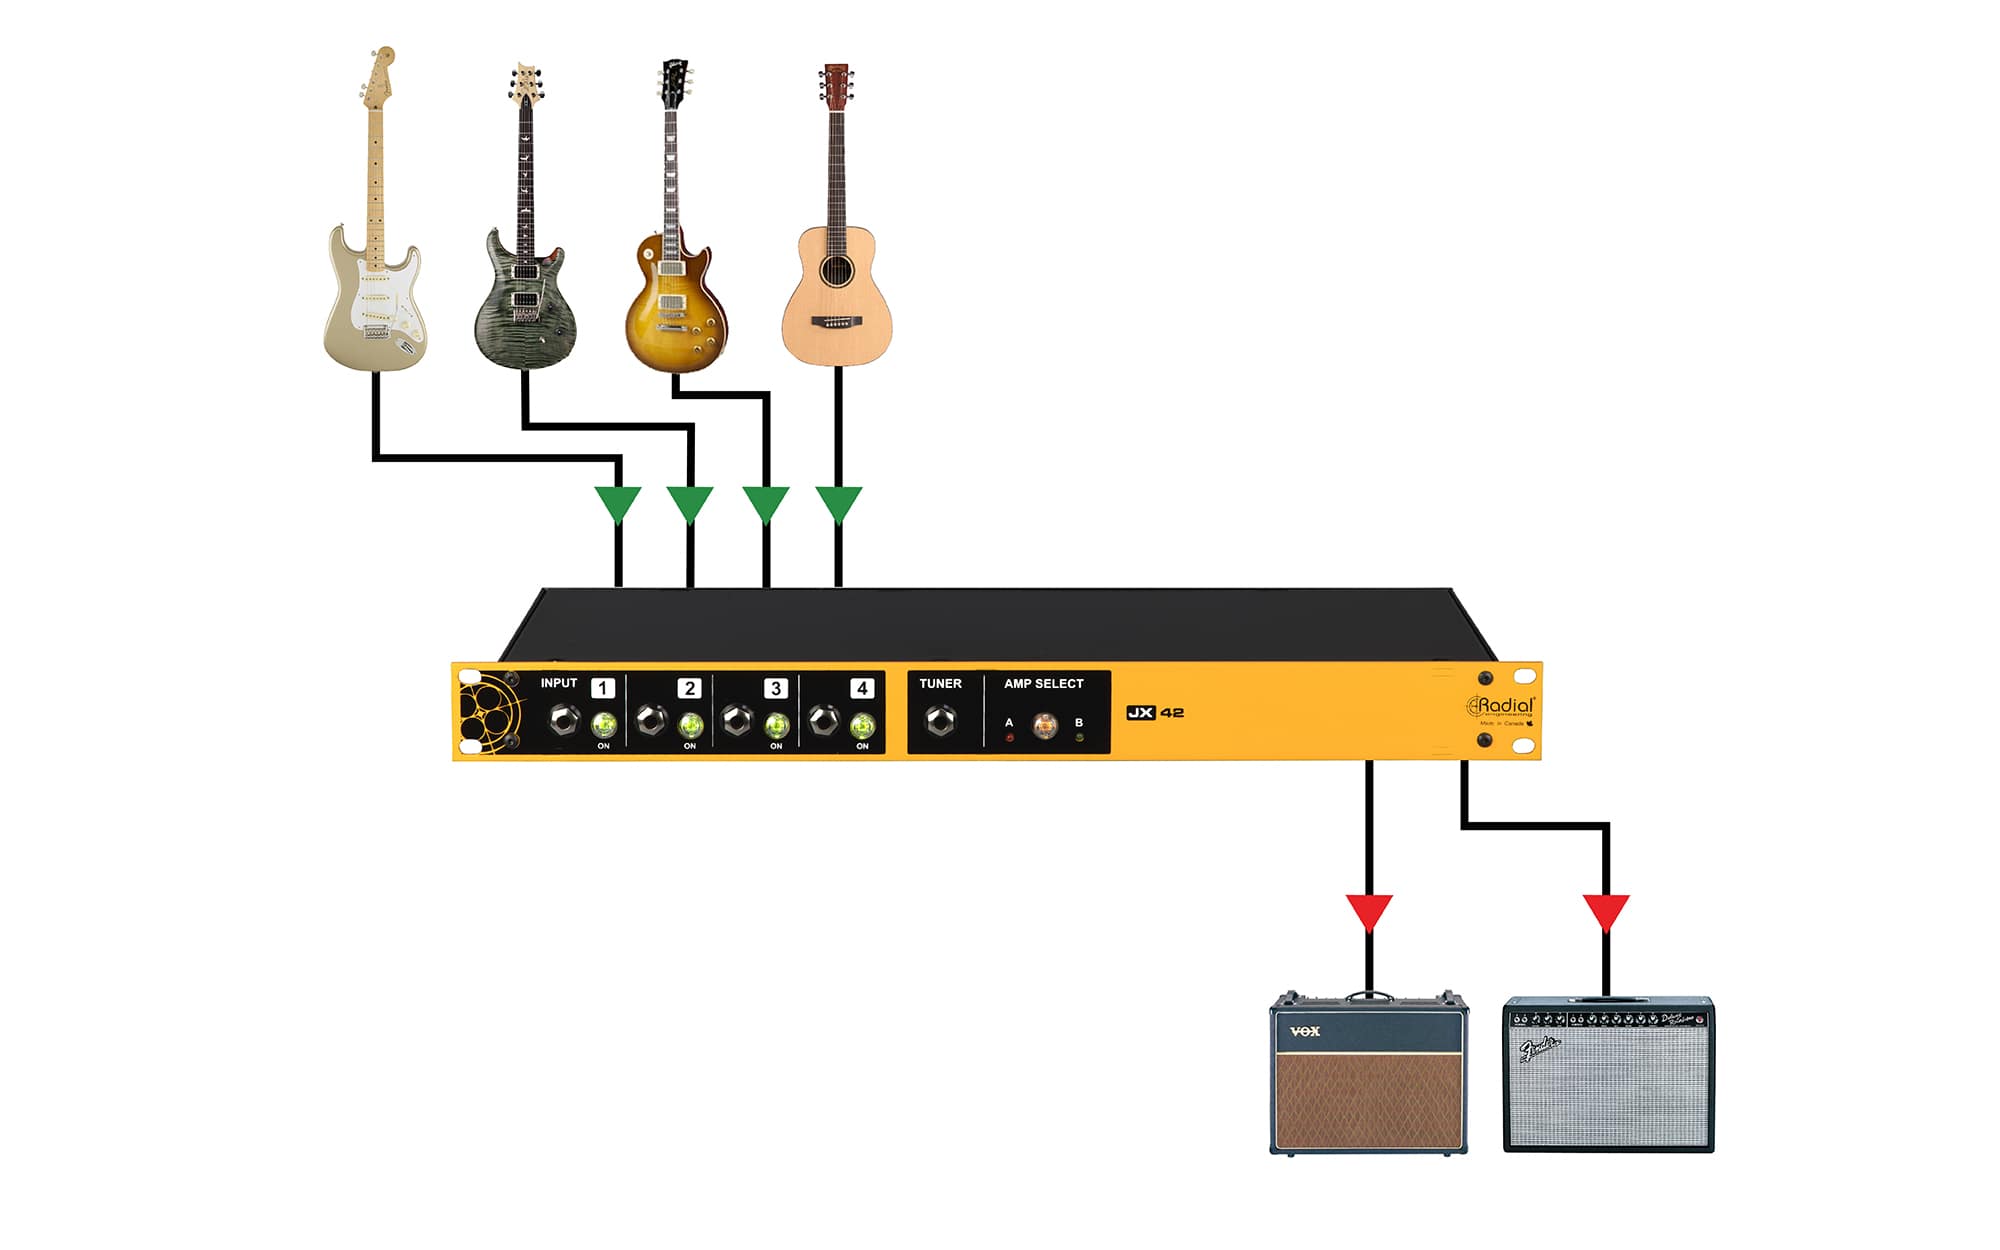 JX42 Application - Switch between four guitars and two amps